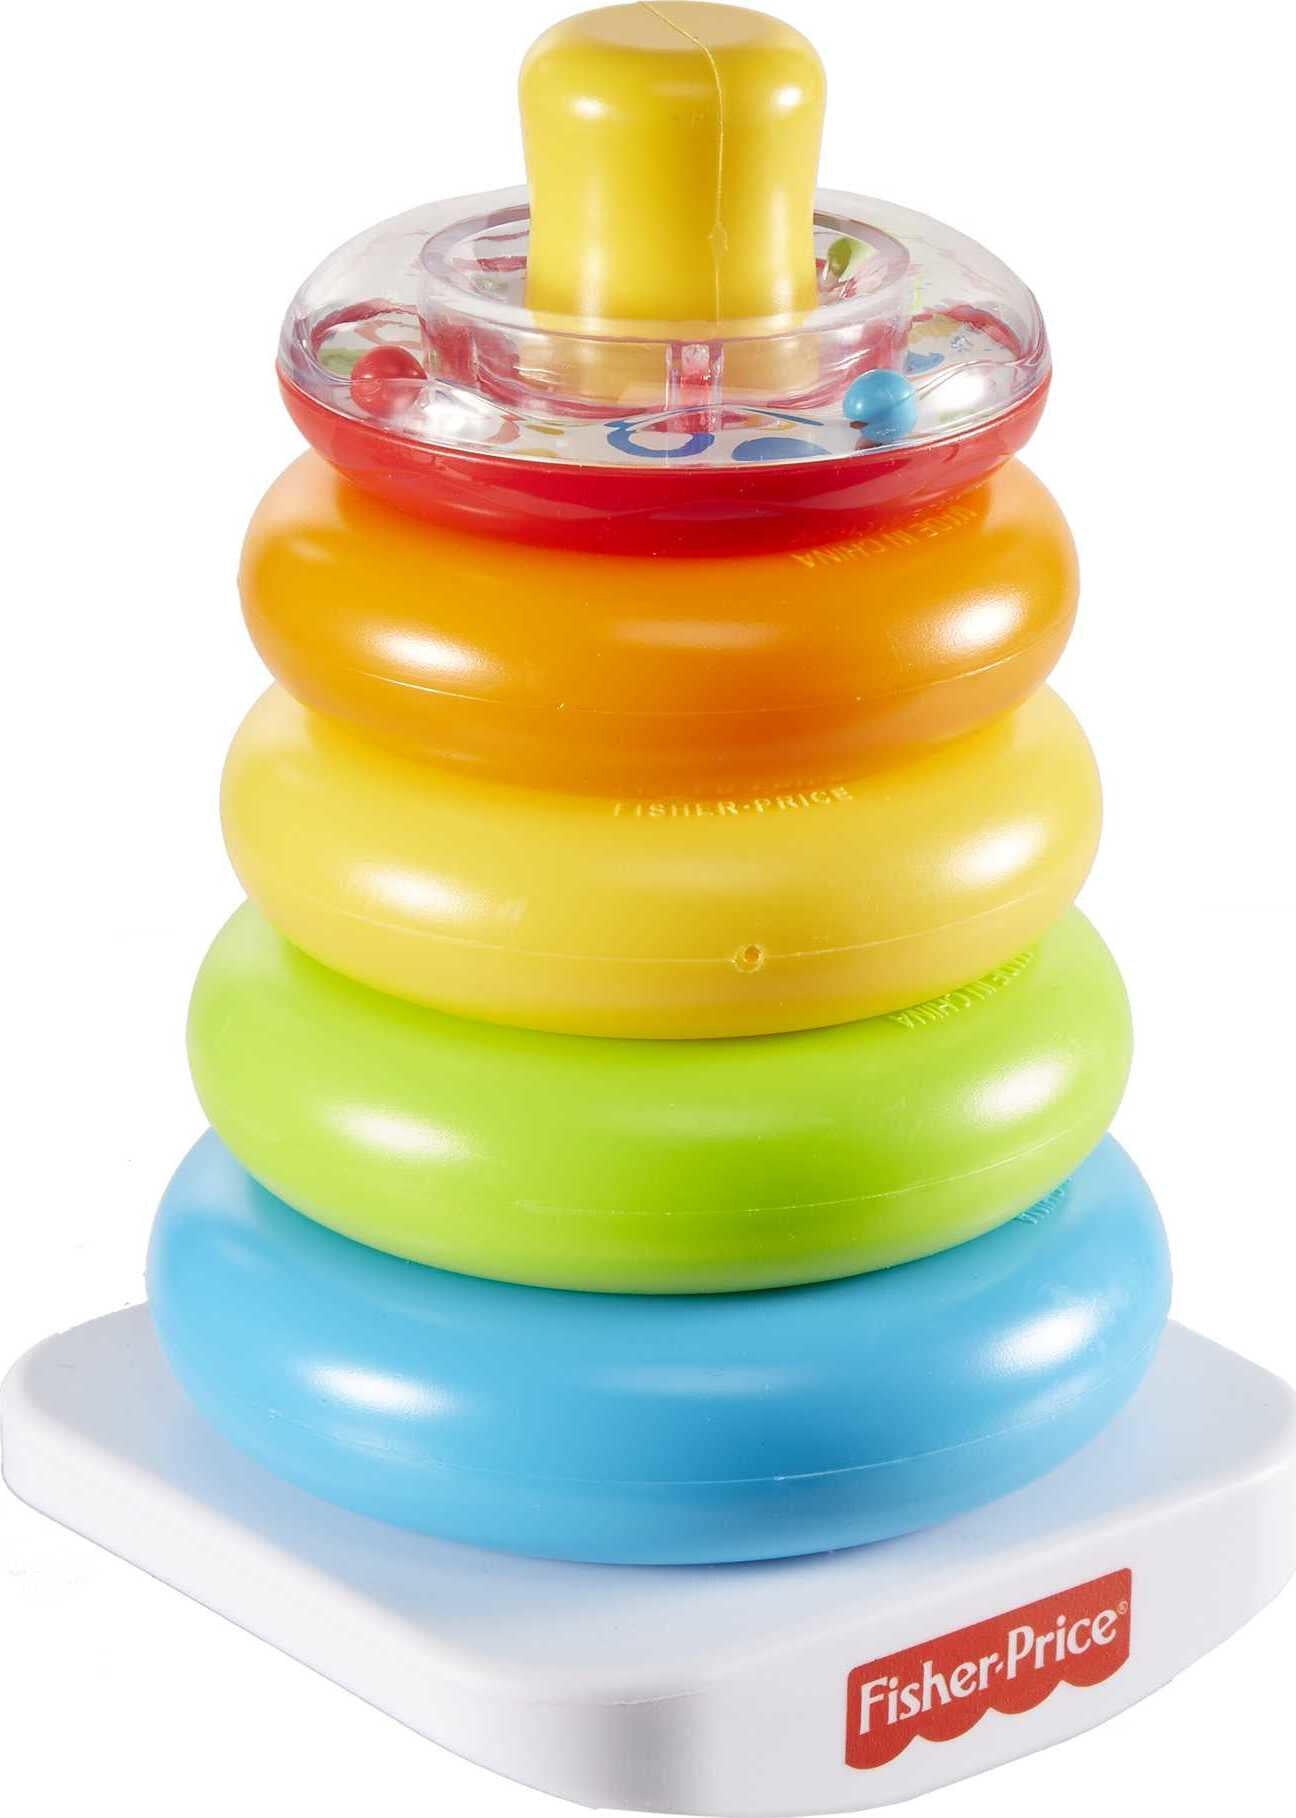 Little's Multicolor Junior Ring Play And Learn Toy - Multicolor Junior Ring  Play And Learn Toy . Buy Kids toys in India. shop for Little's products in  India. | Flipkart.com